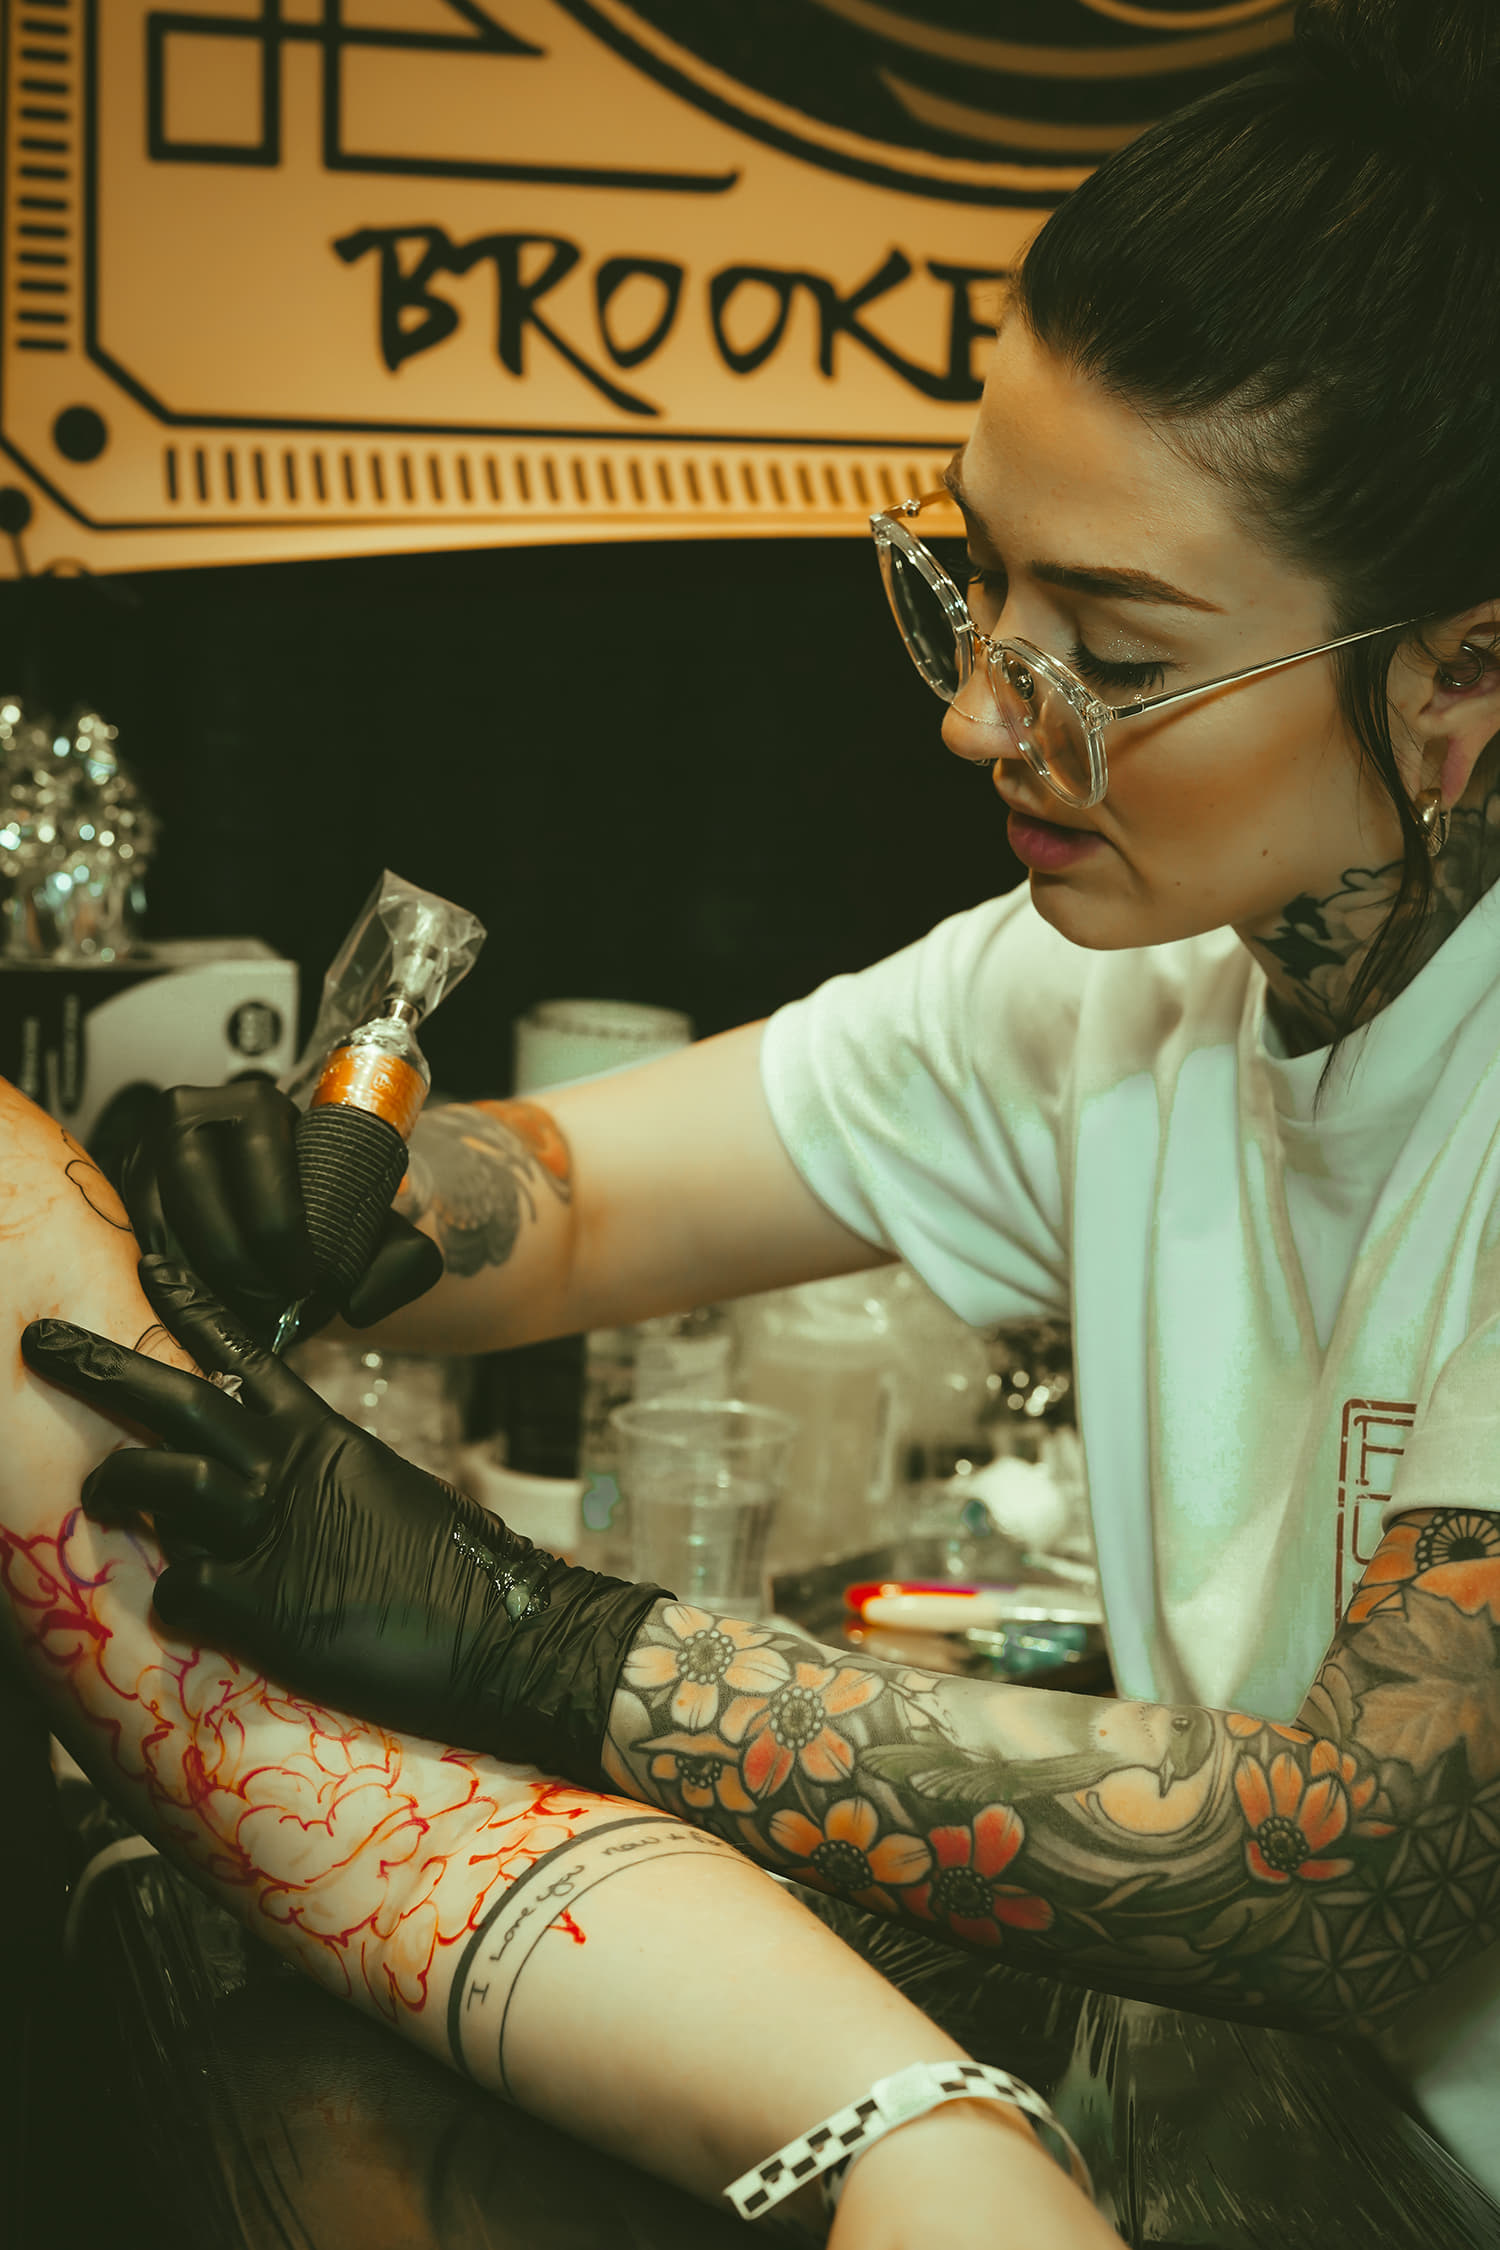 female tattooer Brooke Weeks doing a floral work representing full circle tattoos from San diego photo copyright Adriana de Barros